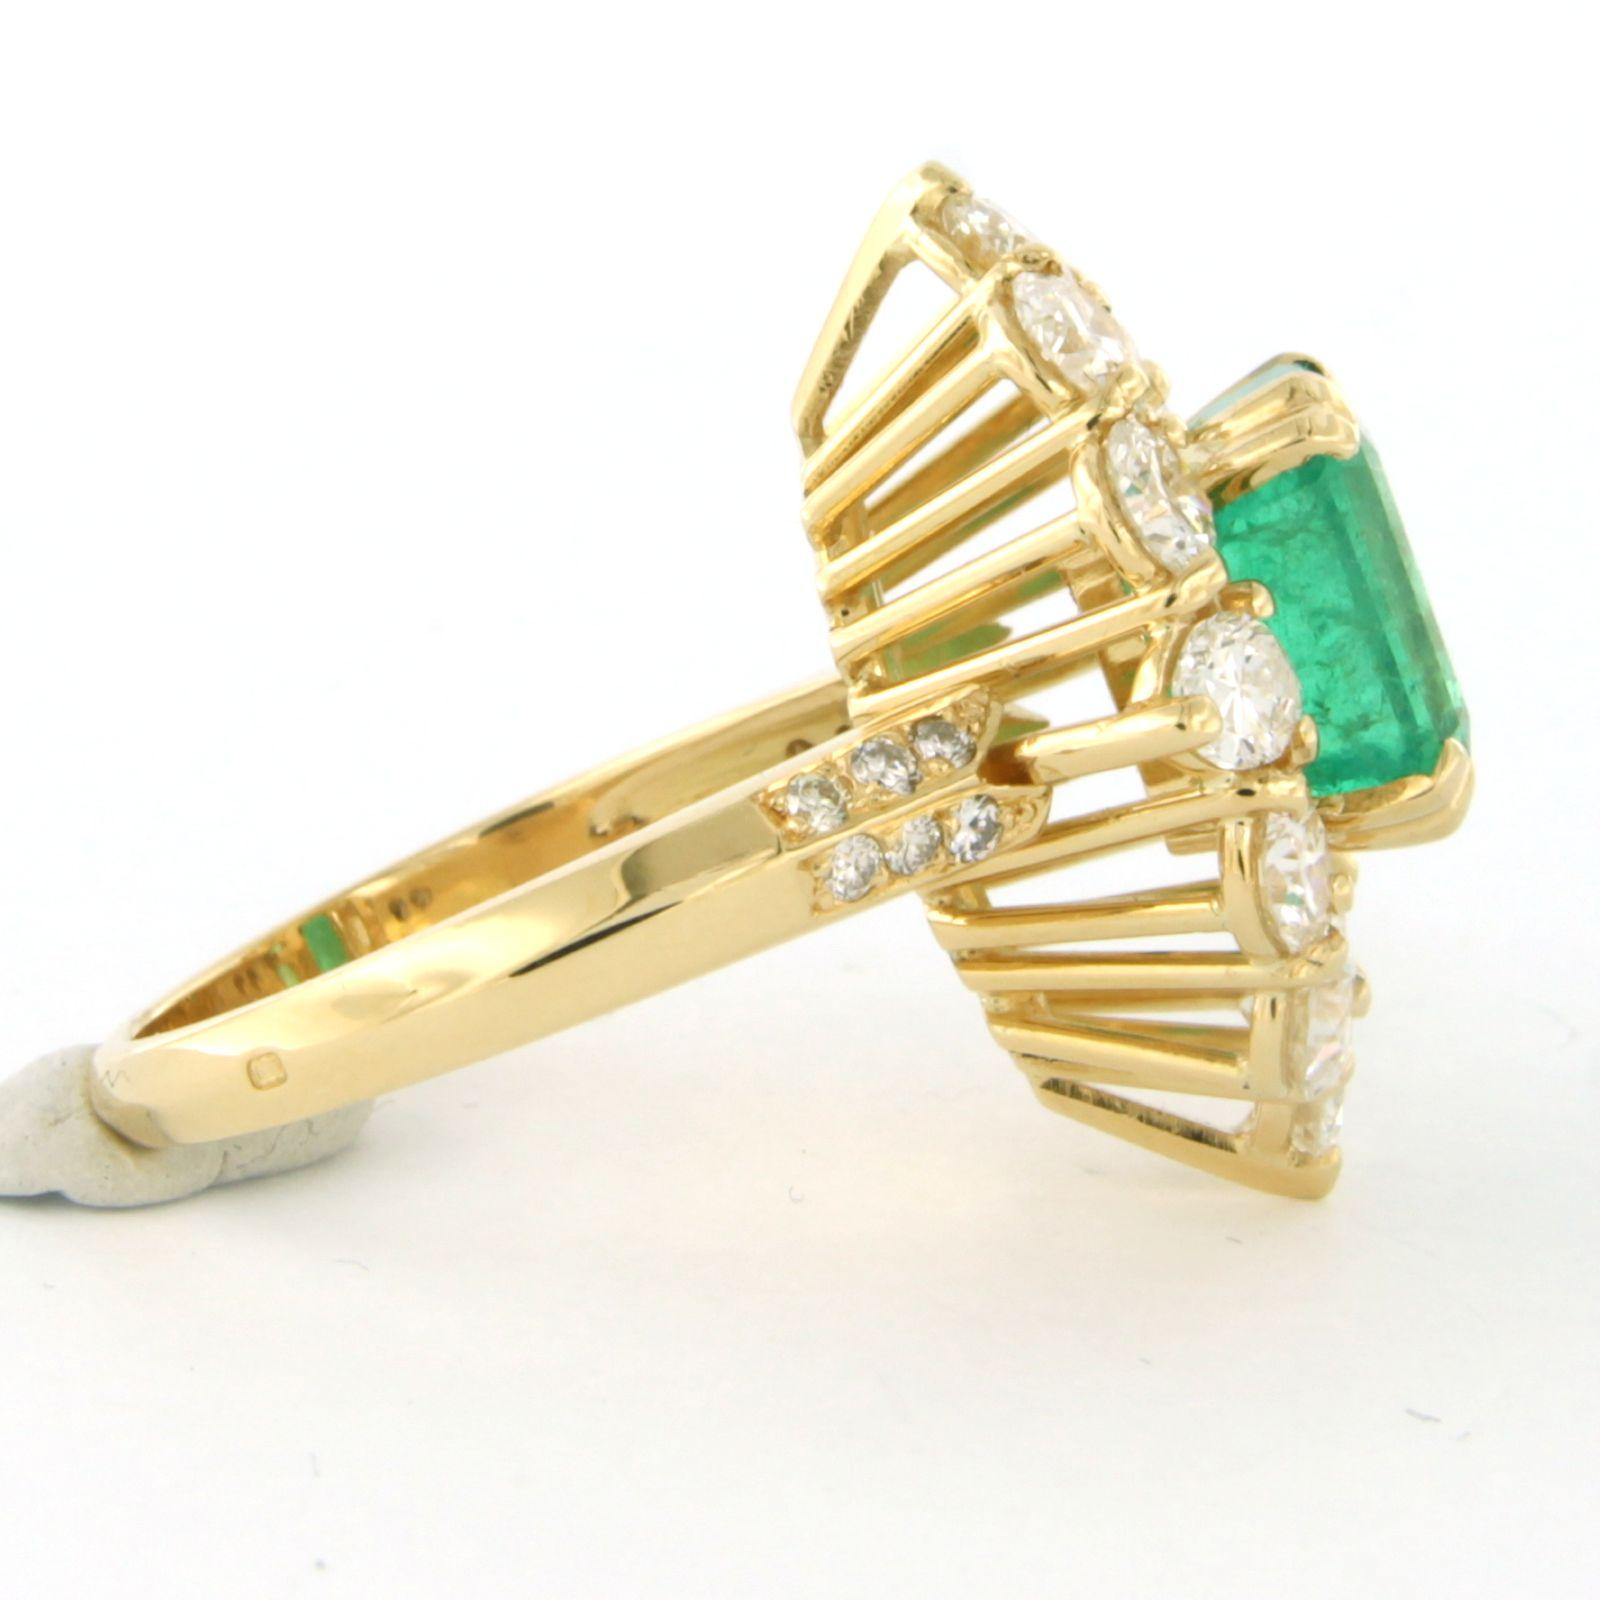 Women's Ring with emerald up to 3.30ct and diamonds up to 2.50ct. 18k yellow gold